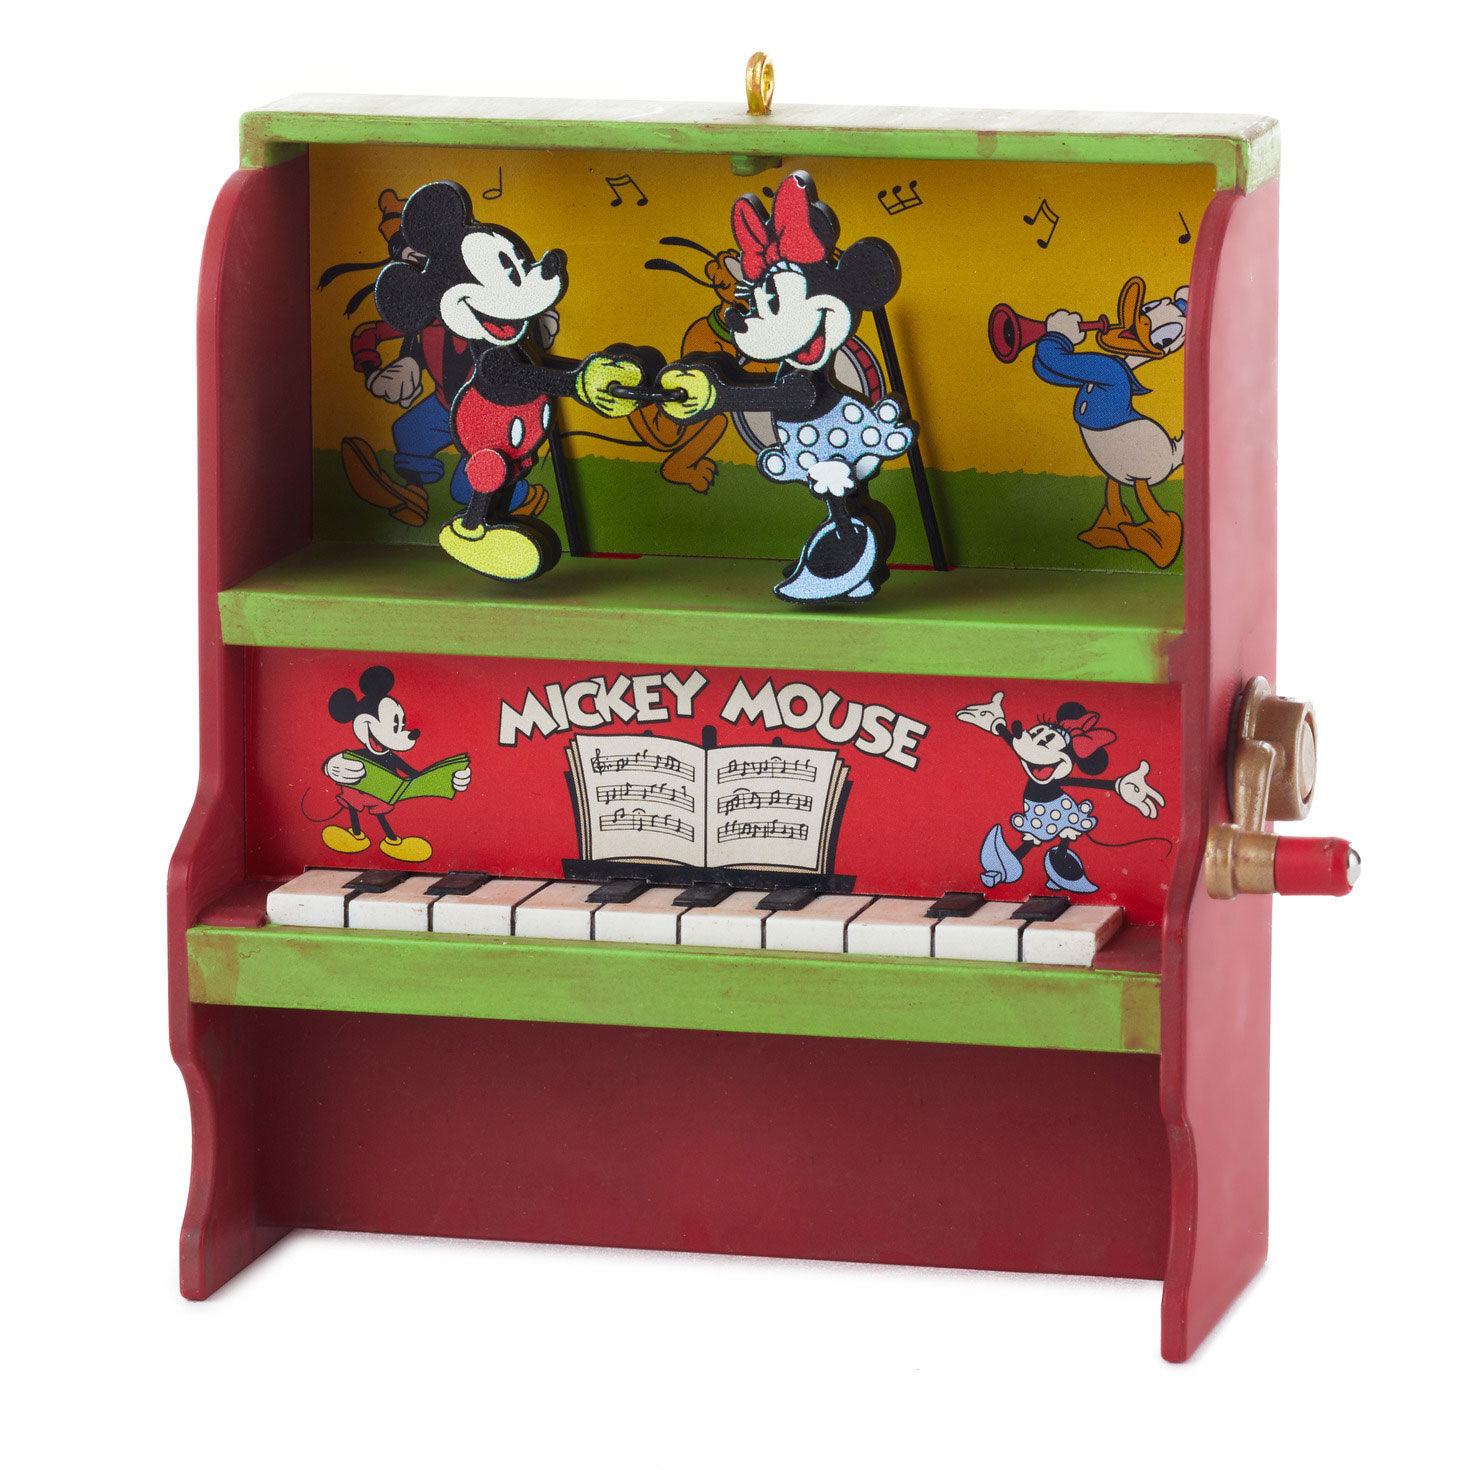 Disney Mickey and Minnie Let's Dance! 2023 Musical Ornament with Motion